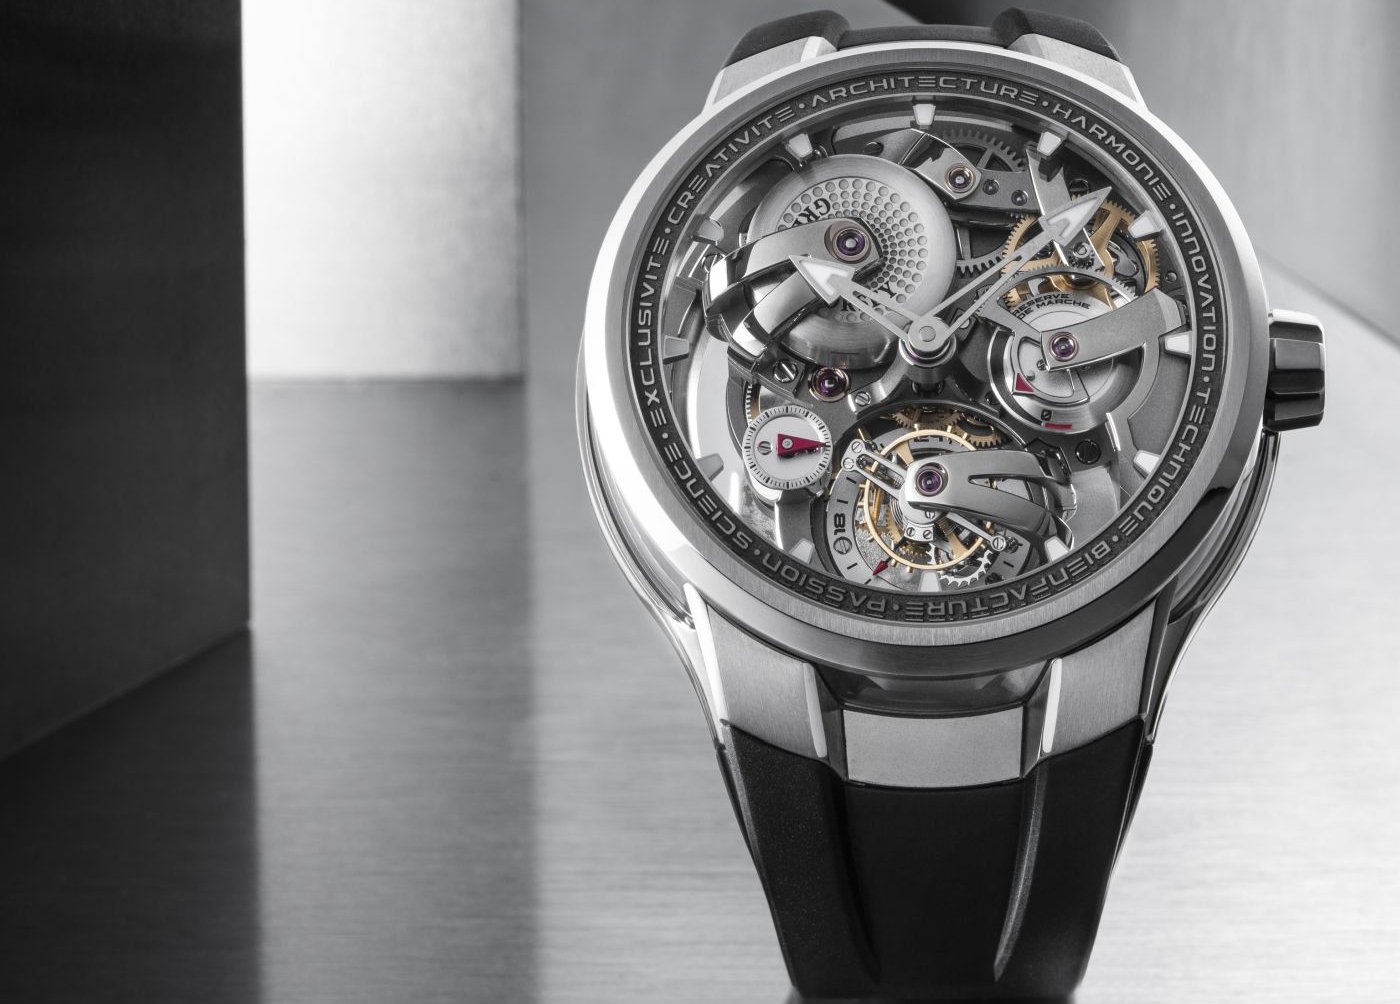 Introducing the Greubel Forsey Tourbillon 24 Secondes Architecture